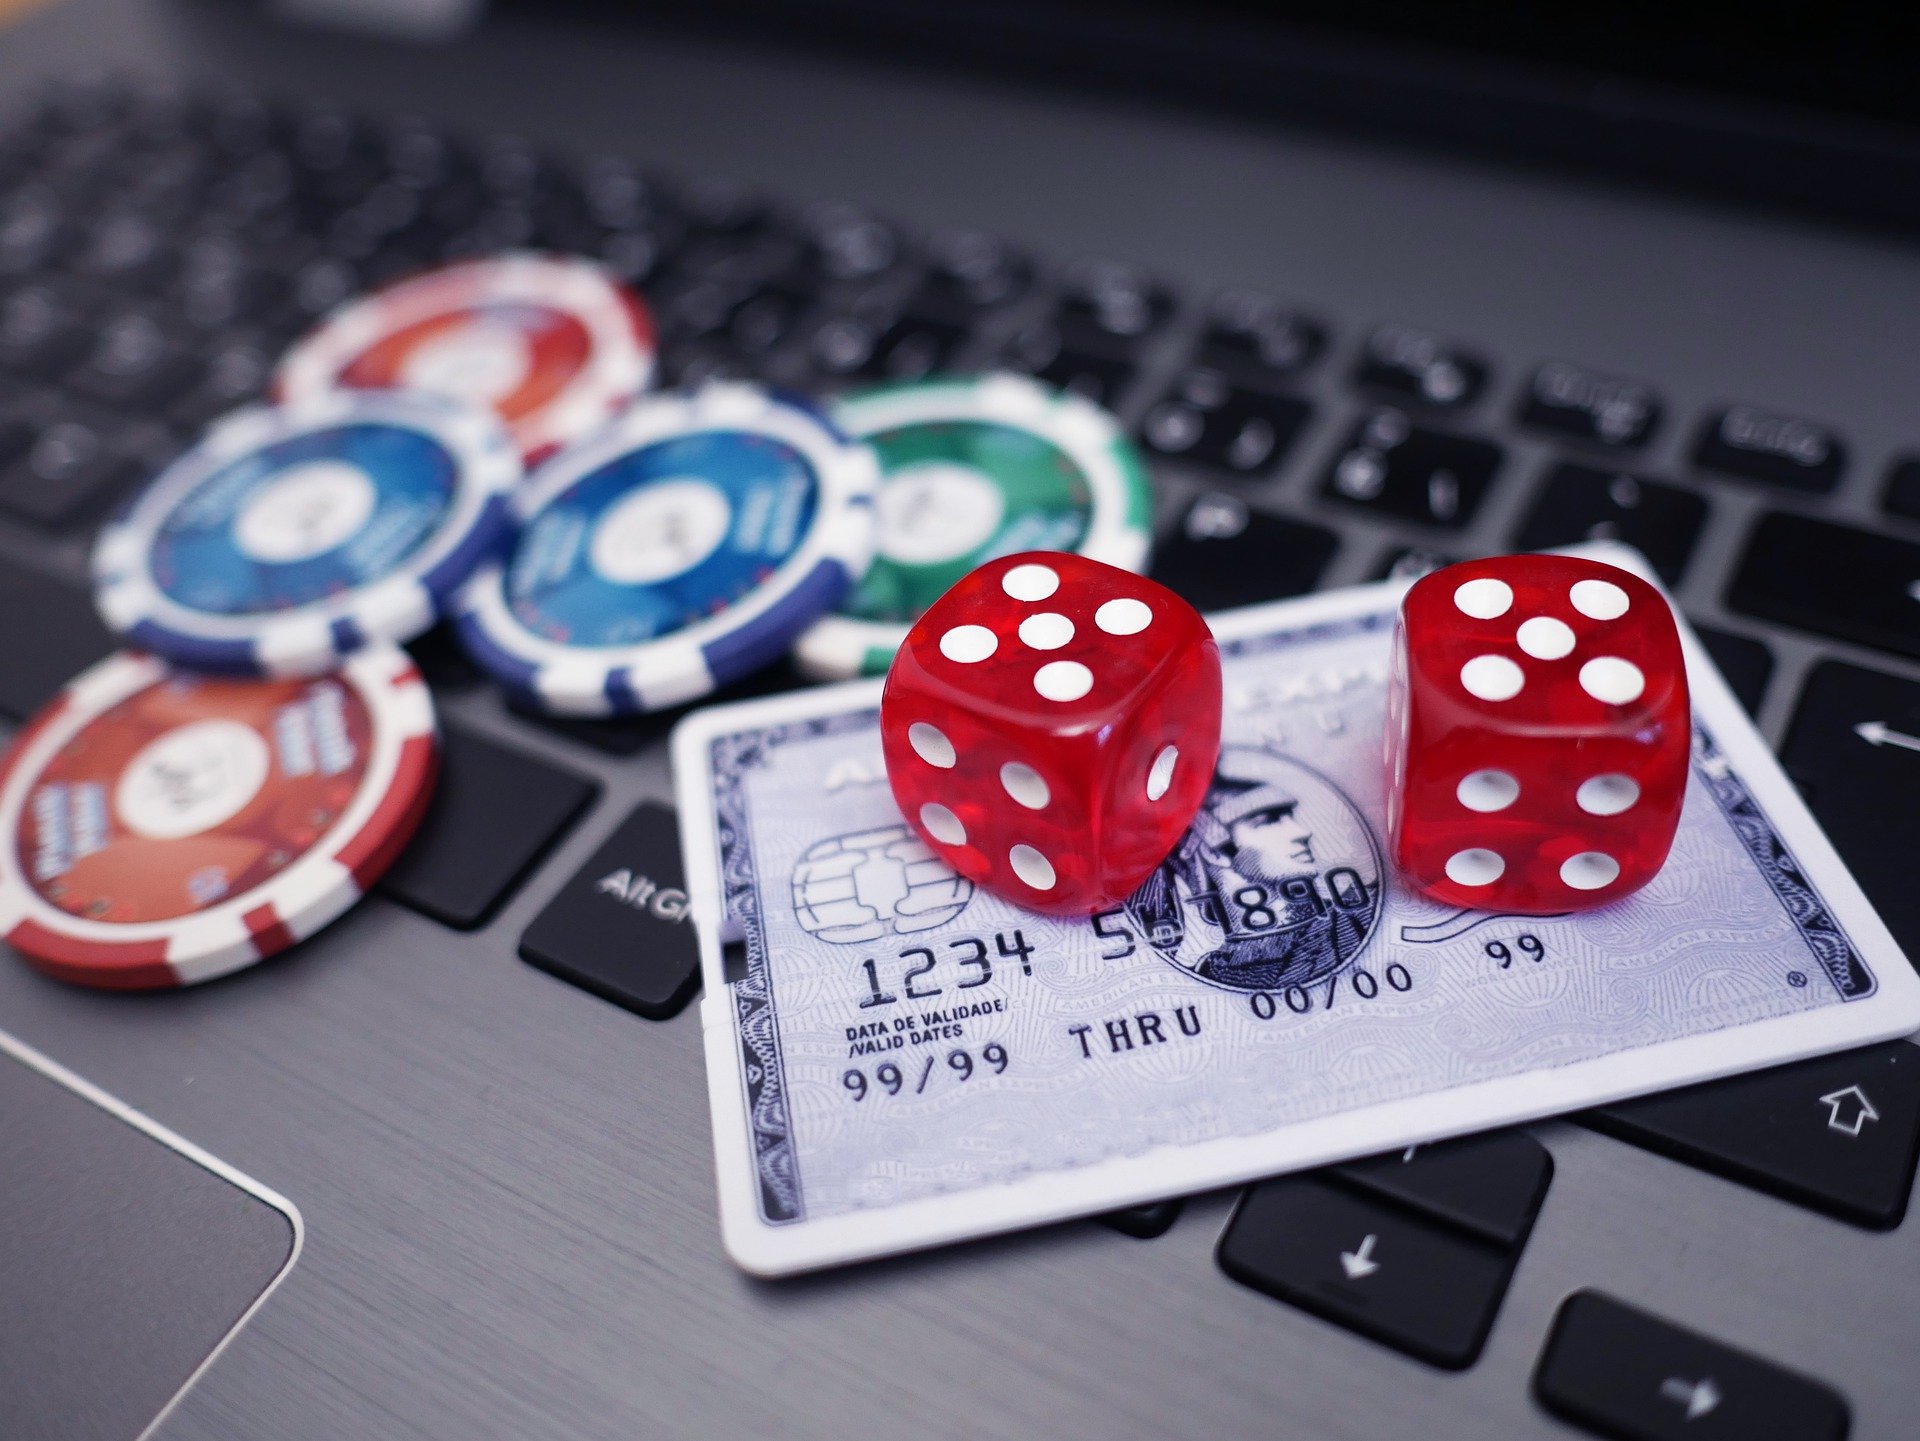 casinos Reviewed: What Can One Learn From Other's Mistakes